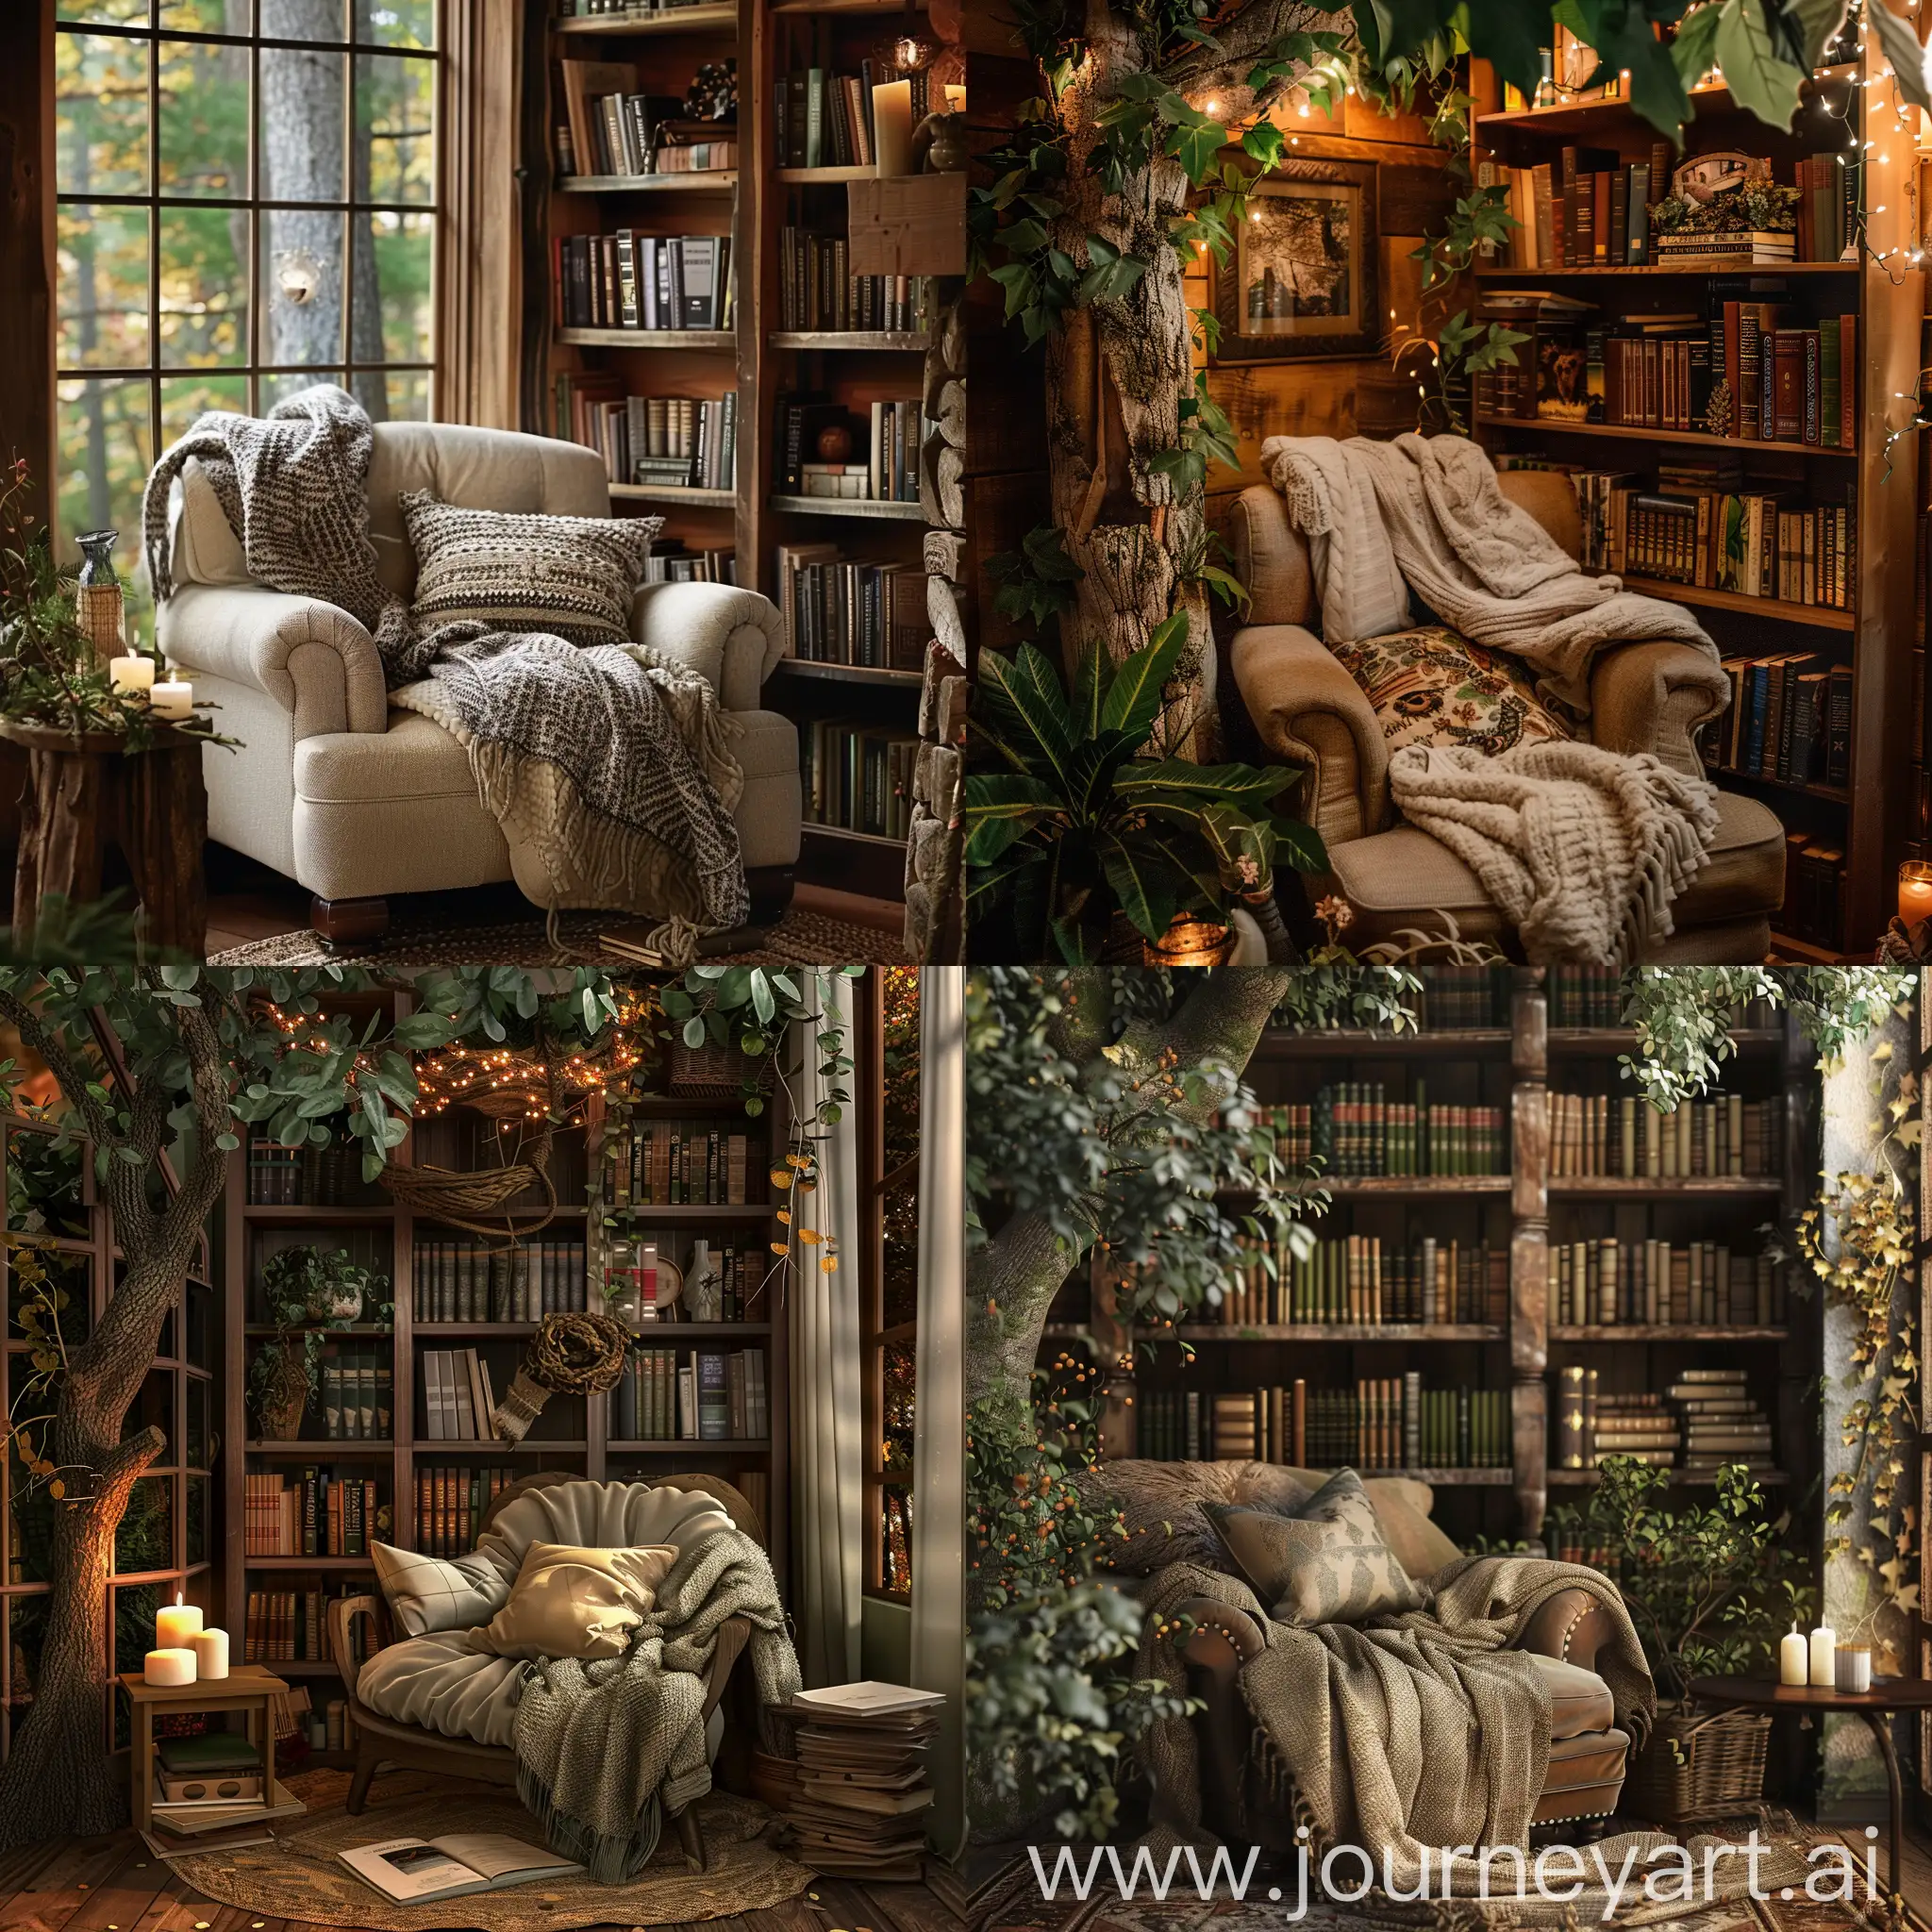 "Imagine you're on a mid-journey through a forest-themed haven. In a cozy corner of this sanctuary, there's a comfortable chair beckoning with its plush cushions and a soft throw blanket inviting you to curl up and unwind. Beside you stands a sturdy wooden bookshelf, its shelves filled with an array of nature books—volumes on wildlife, flora, and the secrets of the wilderness. As you settle in, surrounded by the quiet rustle of leaves and the gentle flicker of a nearby candle, let your imagination wander through the pages, immersing yourself in the tranquil retreat of this forest-inspired nook."



